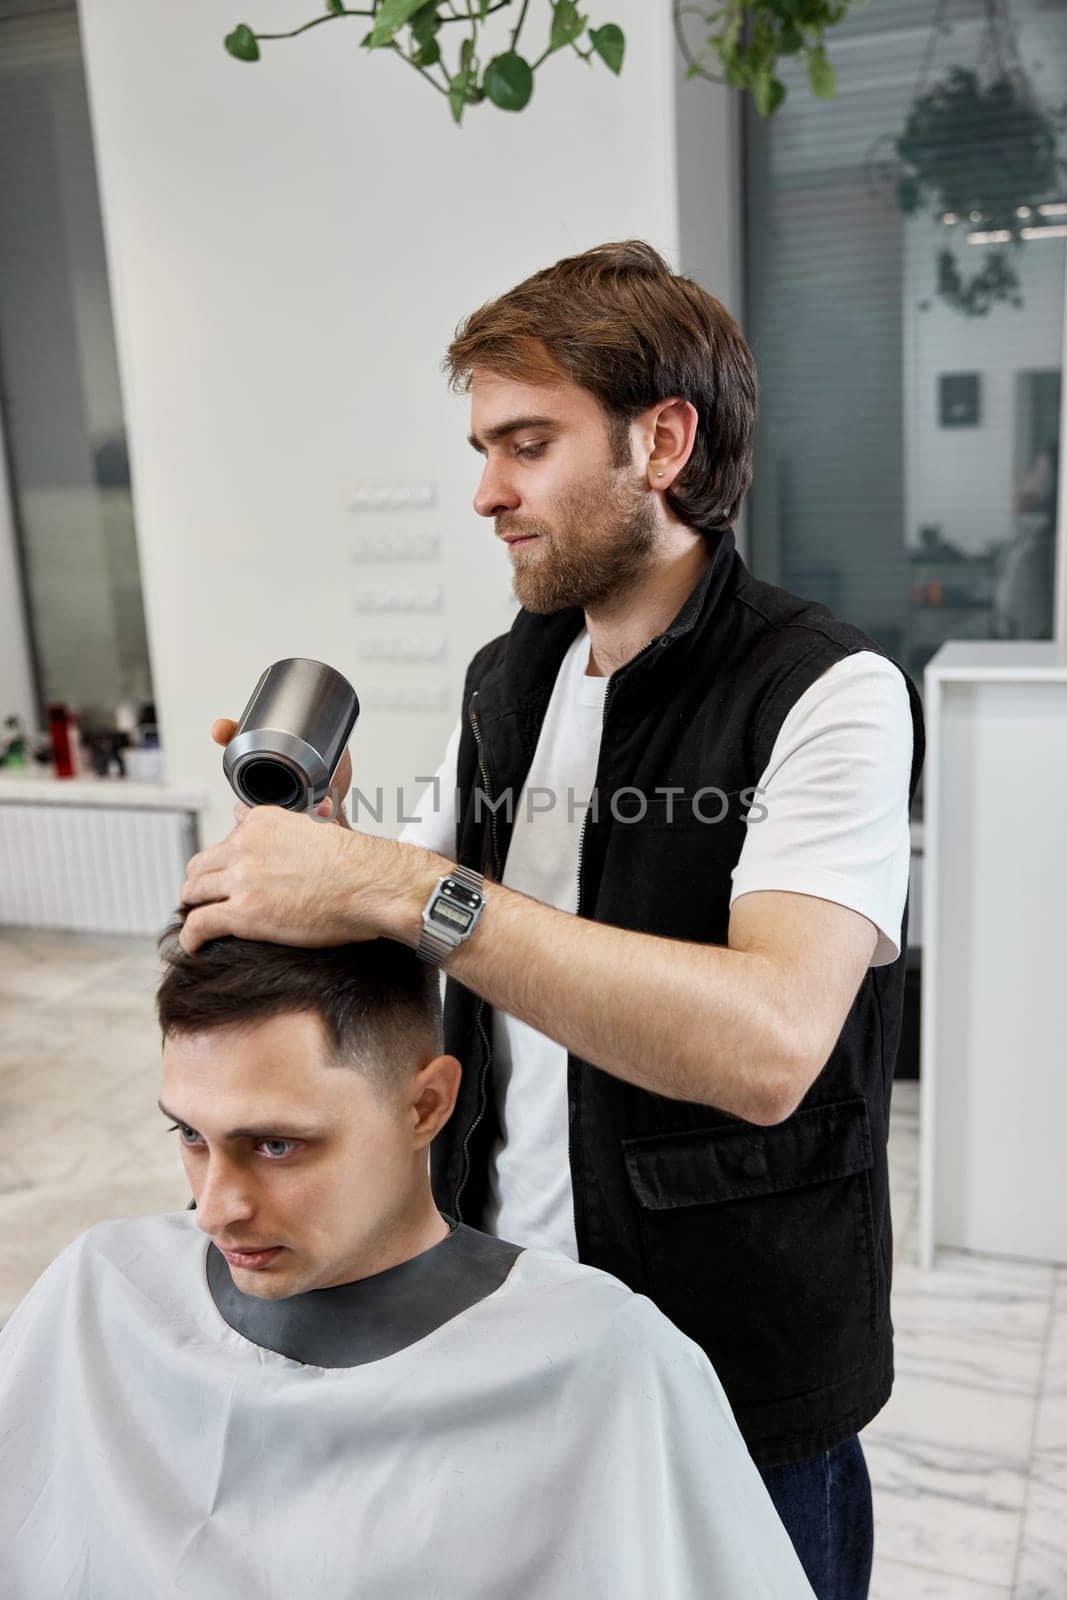 barber during work with man client with hair dryer in barber shop. Haircut in the barbershop.